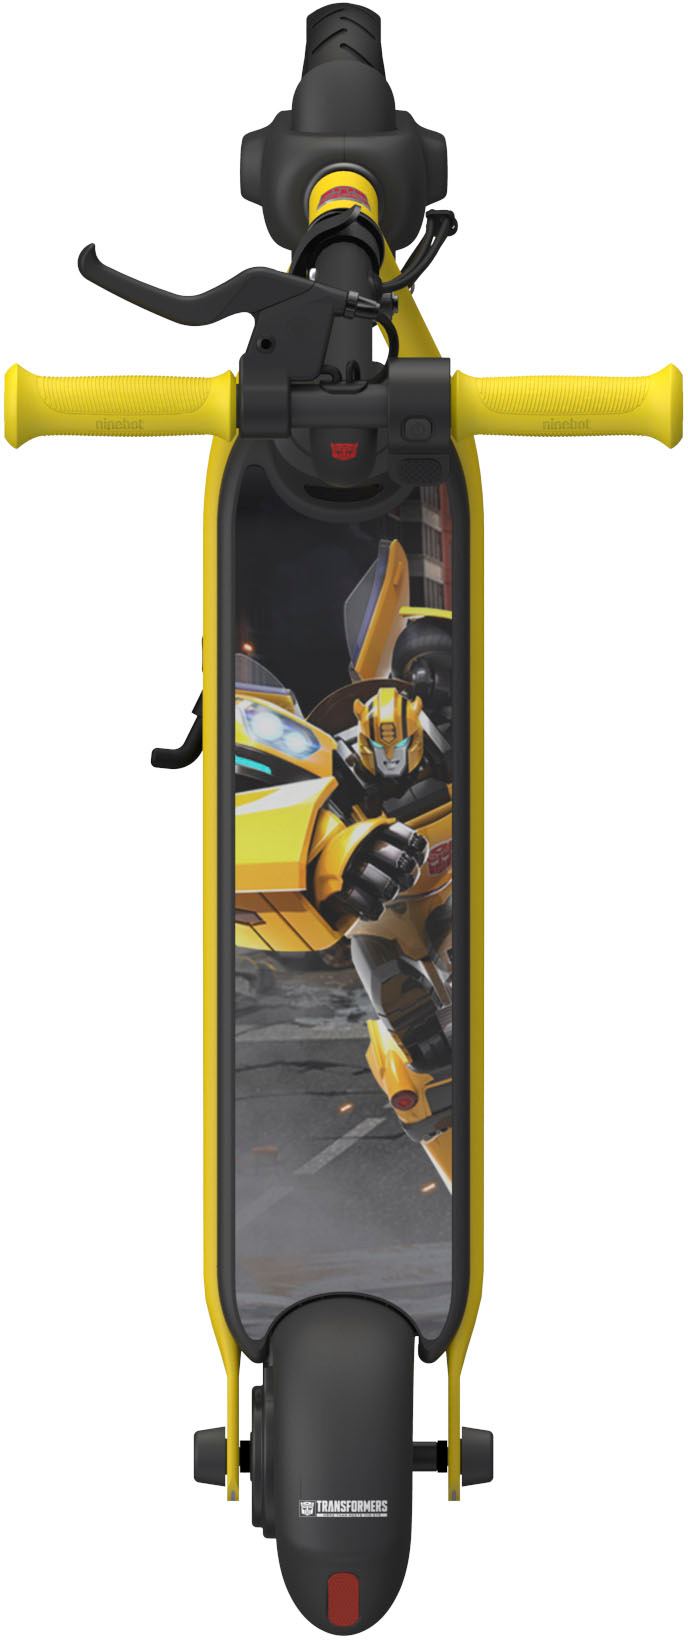 Angle View: Segway - Ninebot C8 Kids Electric Kick Scooter w/6.2 mi Max Operating Range & 10 mph Max Speed - Bumblebee Edition